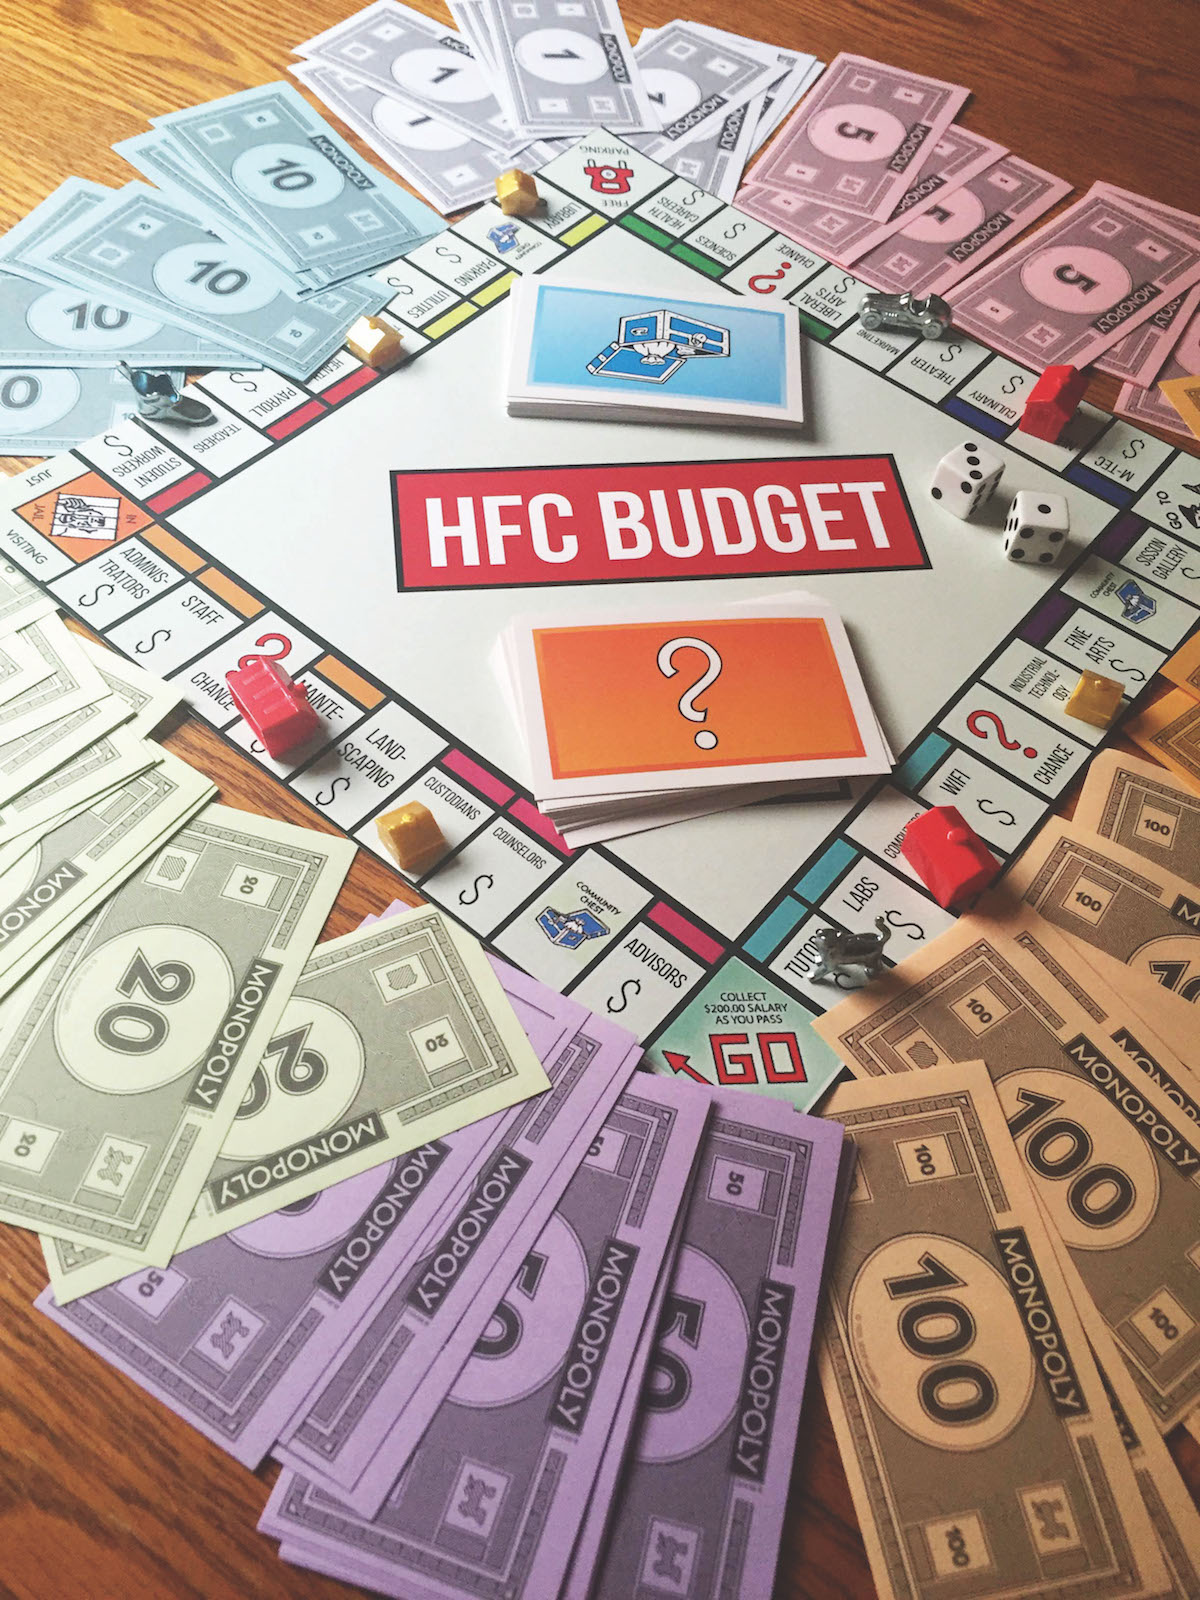 Monopoly style game board with items around board the names of college departments and HFC Budget with question mark cards under it.